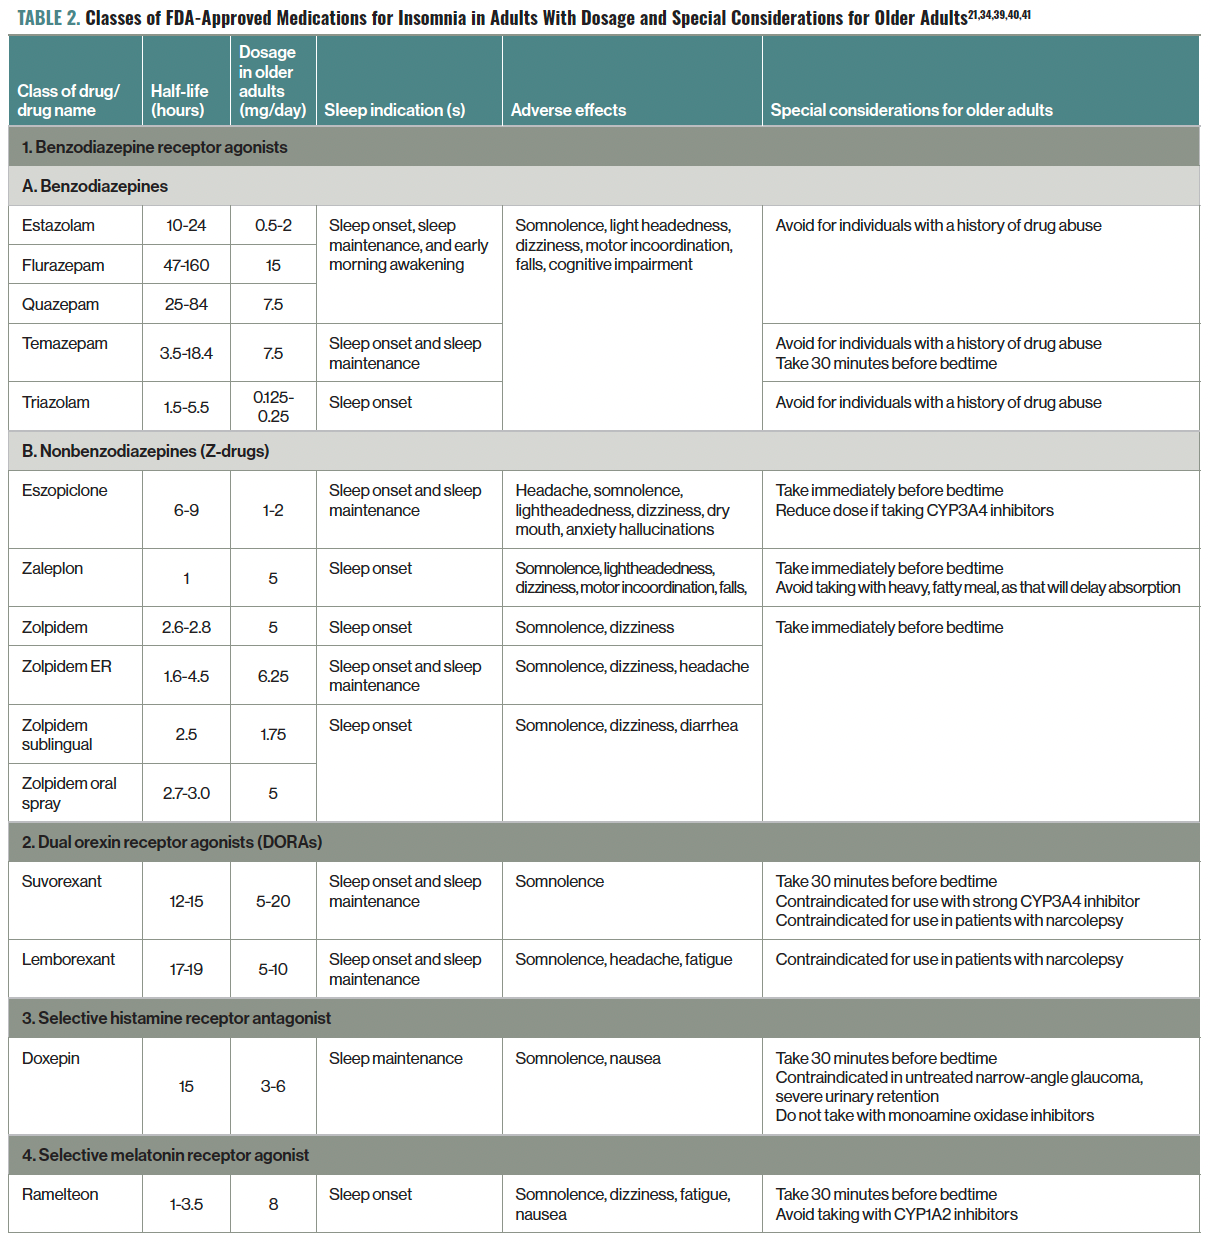 TABLE 2. Classes of FDA-Approved Medications for Insomnia in Adults With Dosage and Special Considerations for Older Adults